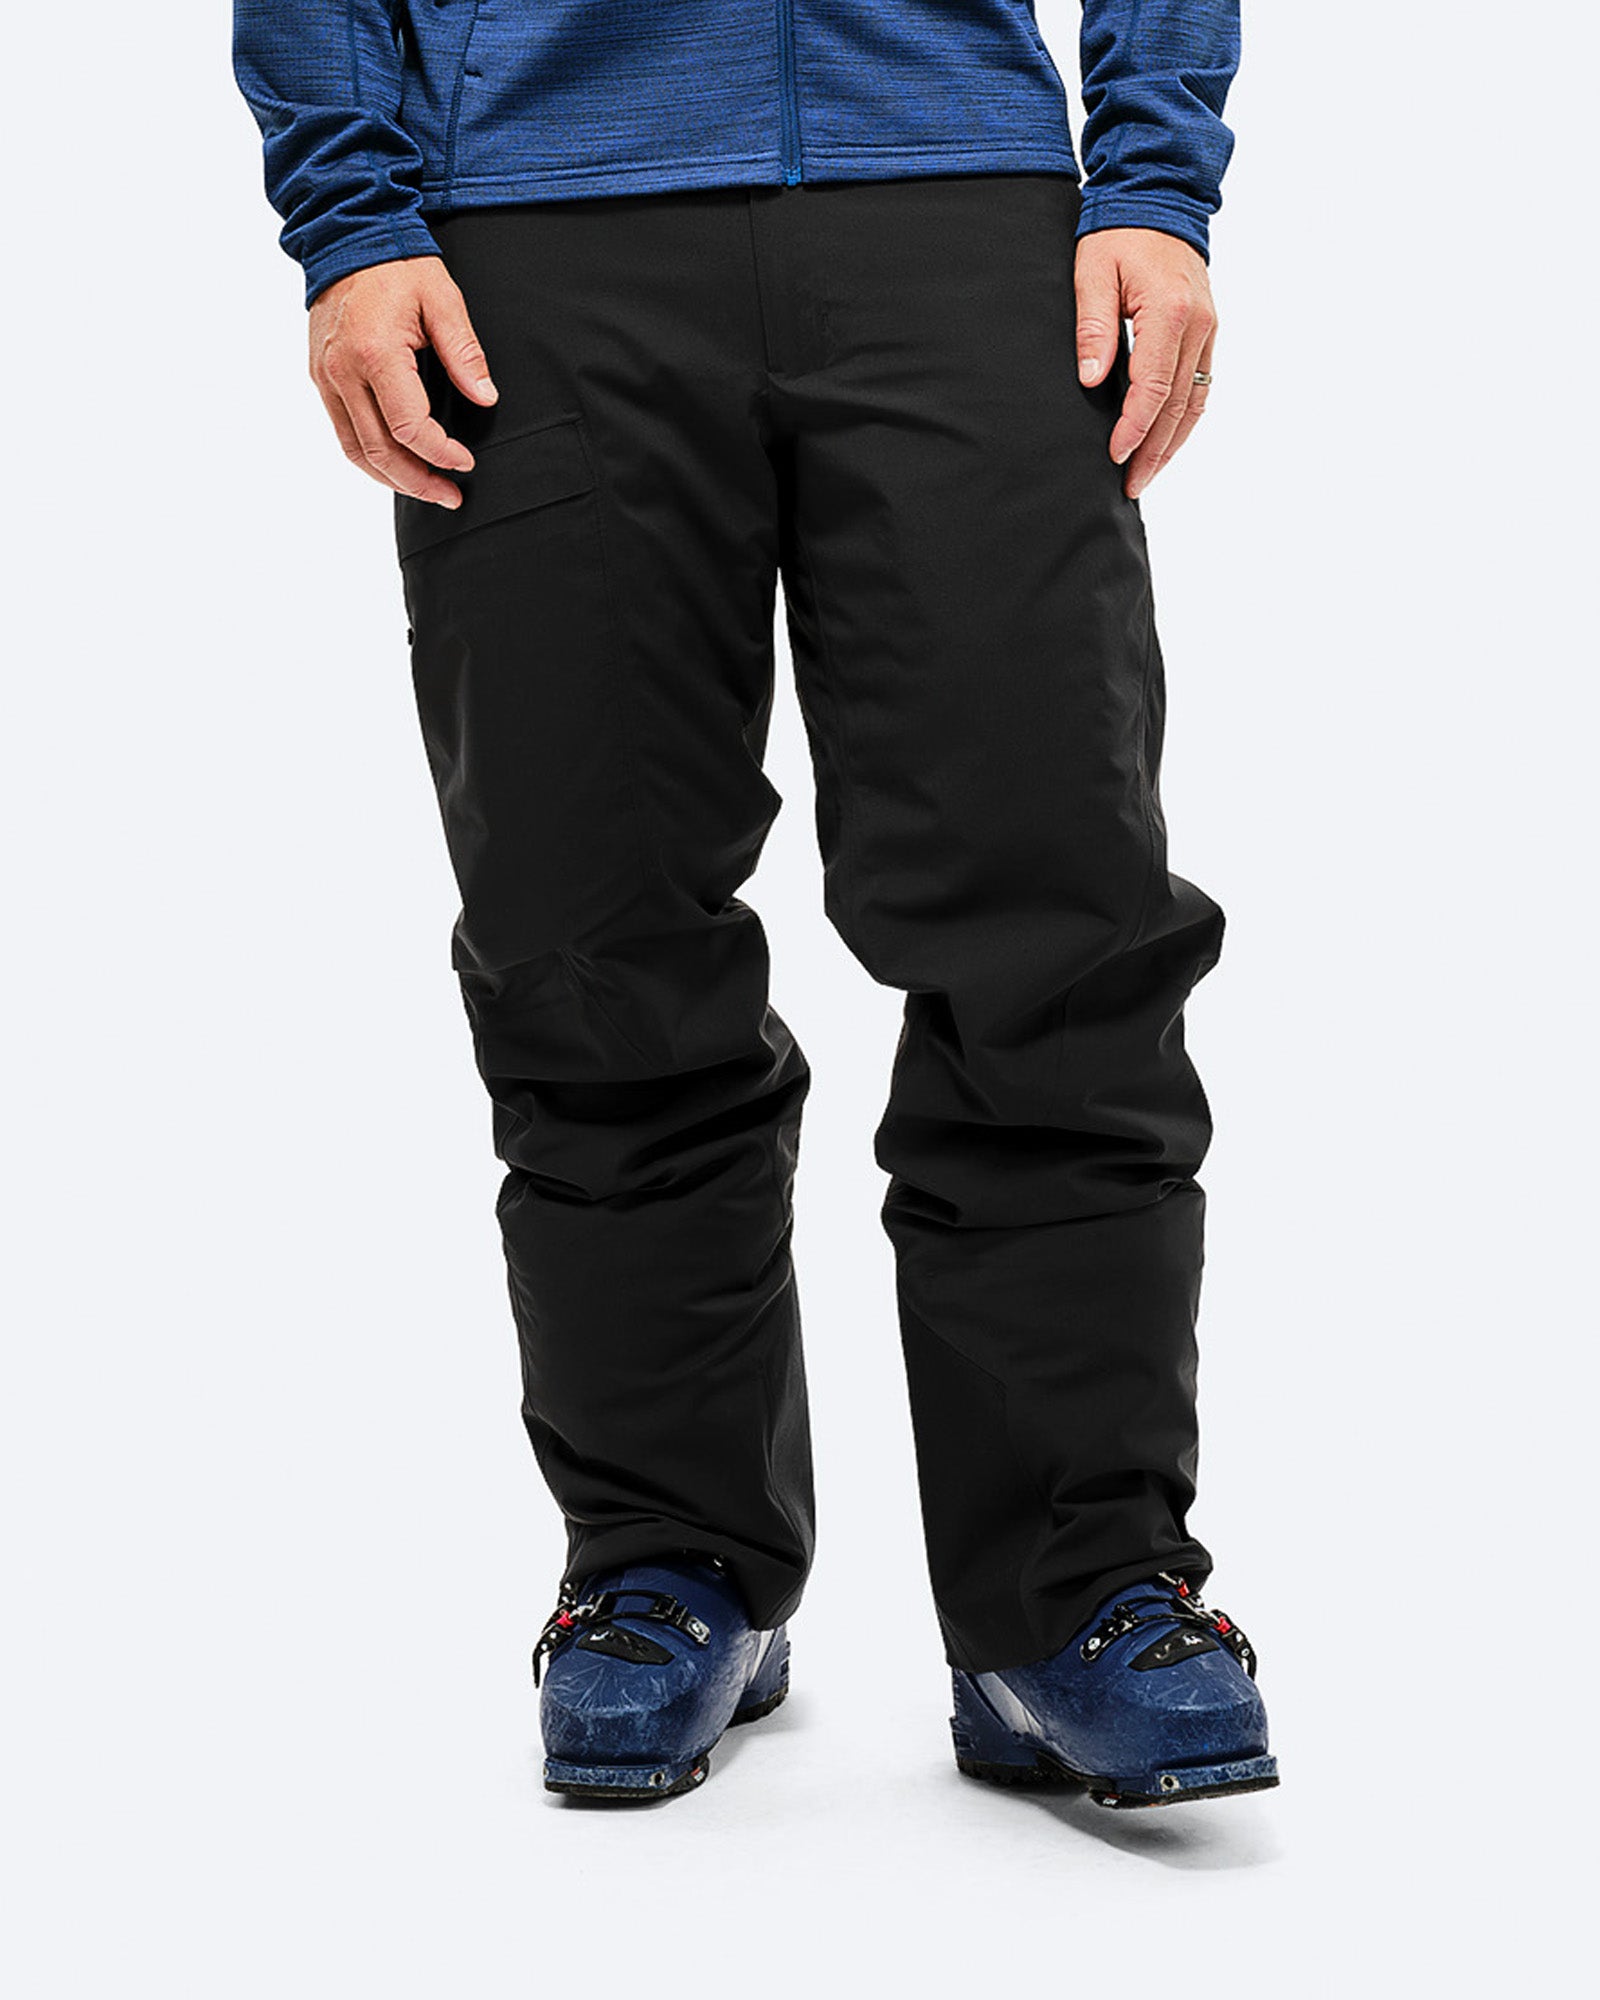 GORE-TEX 2L Stretch light insulated Pant – P-1 | Shop now